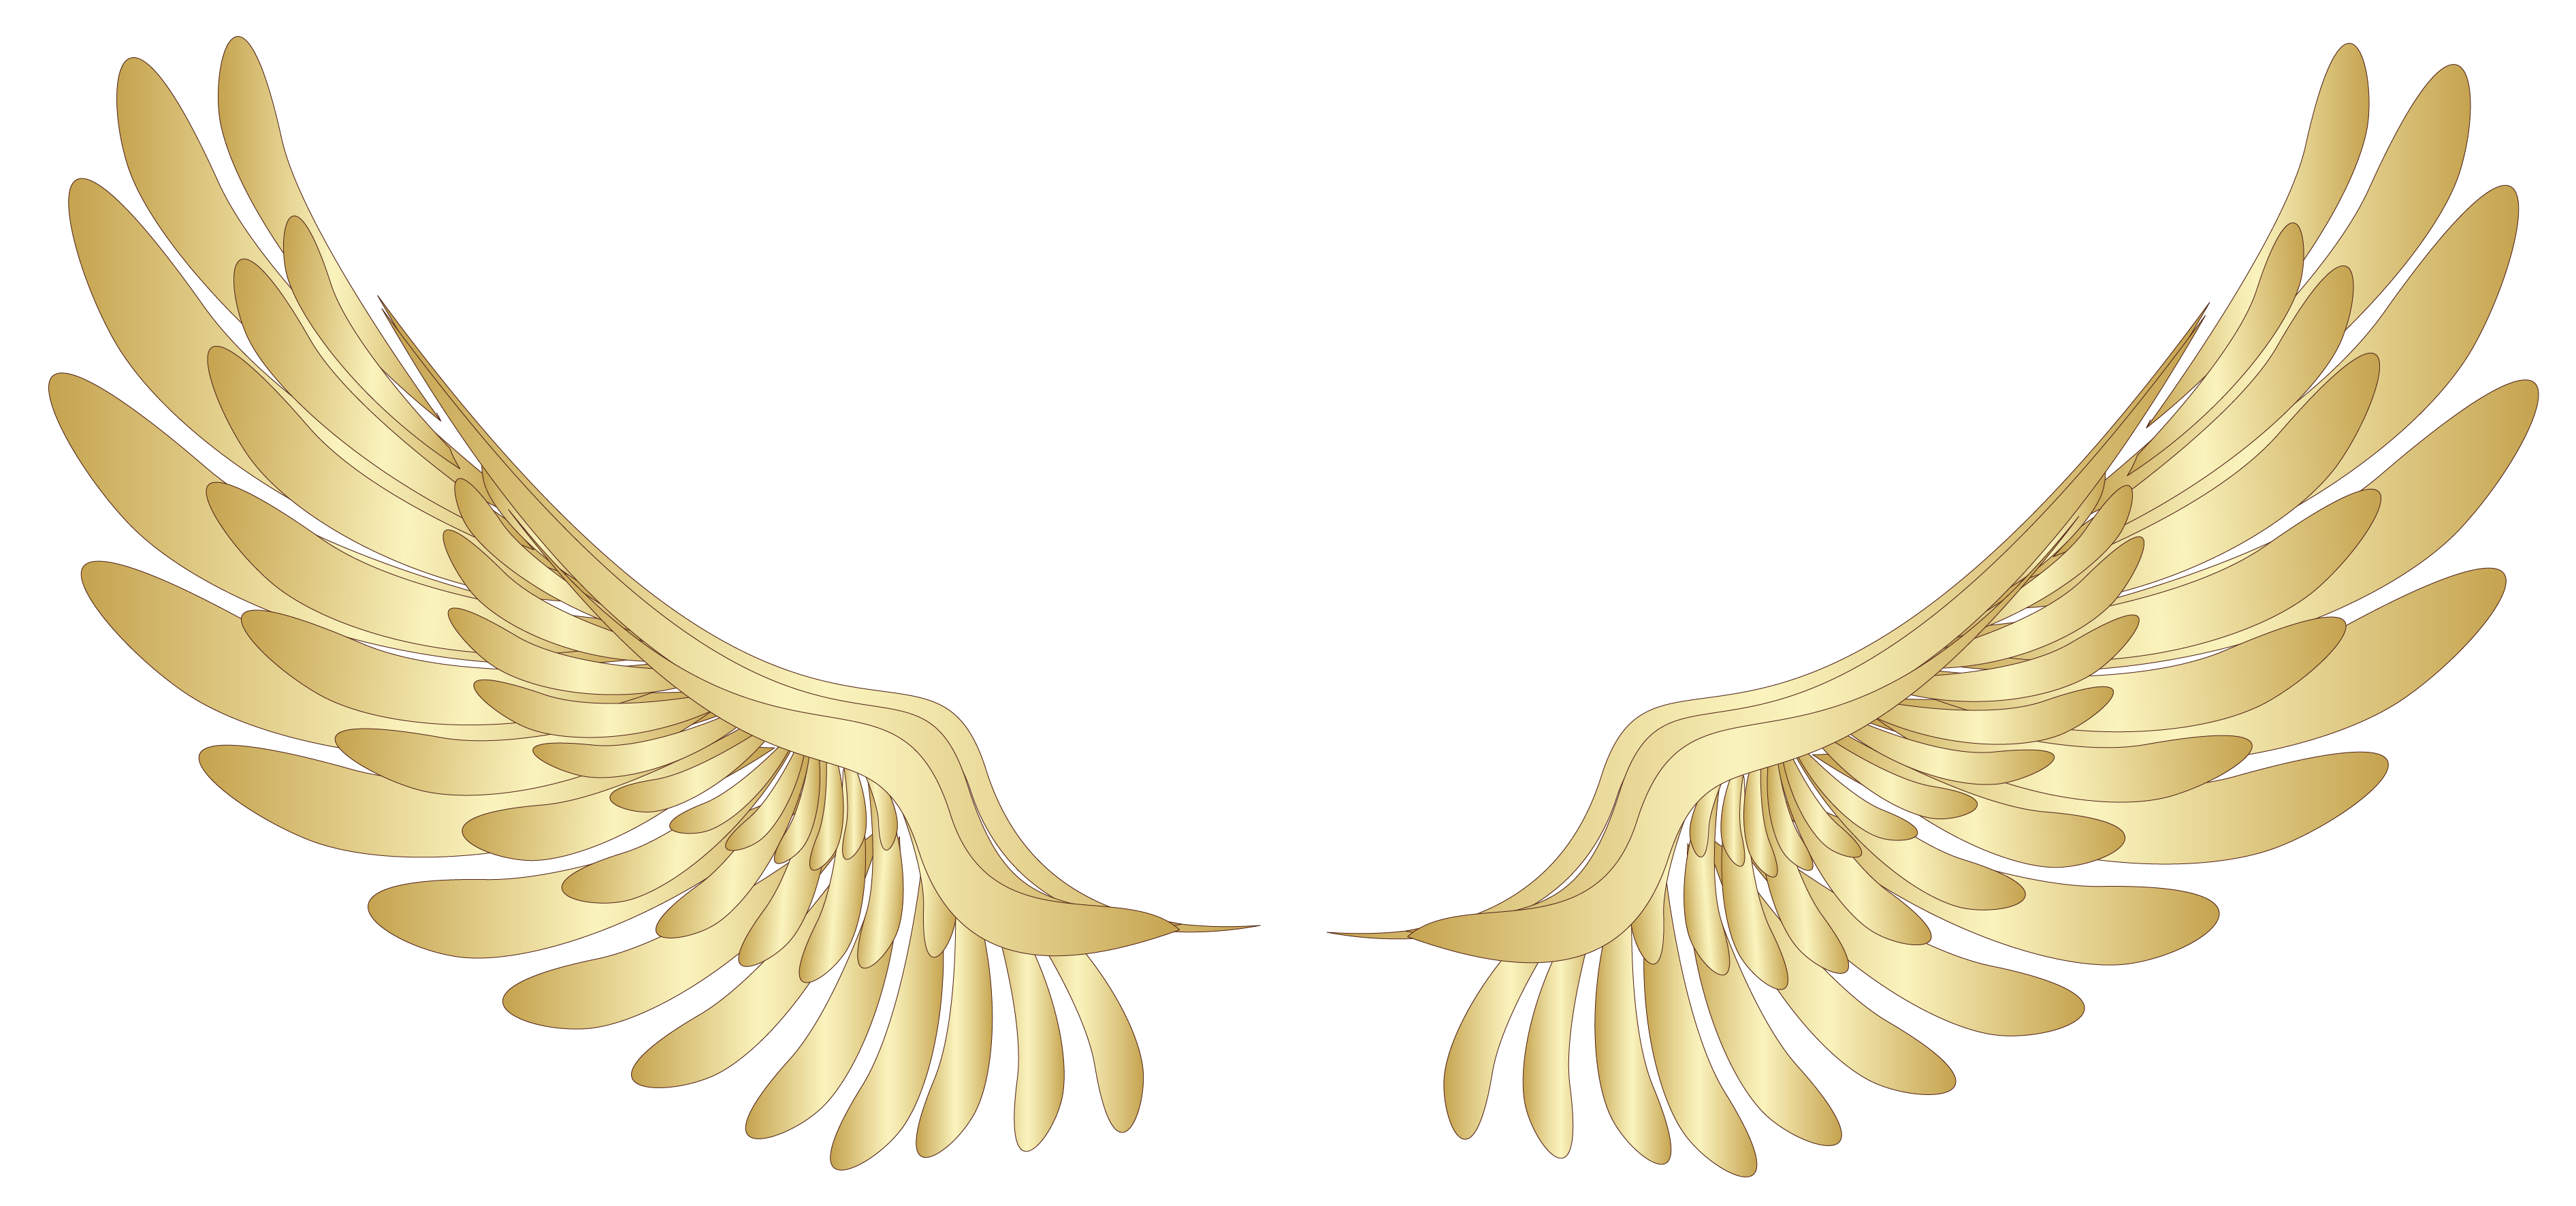 Yellow wings clipart - Clipground